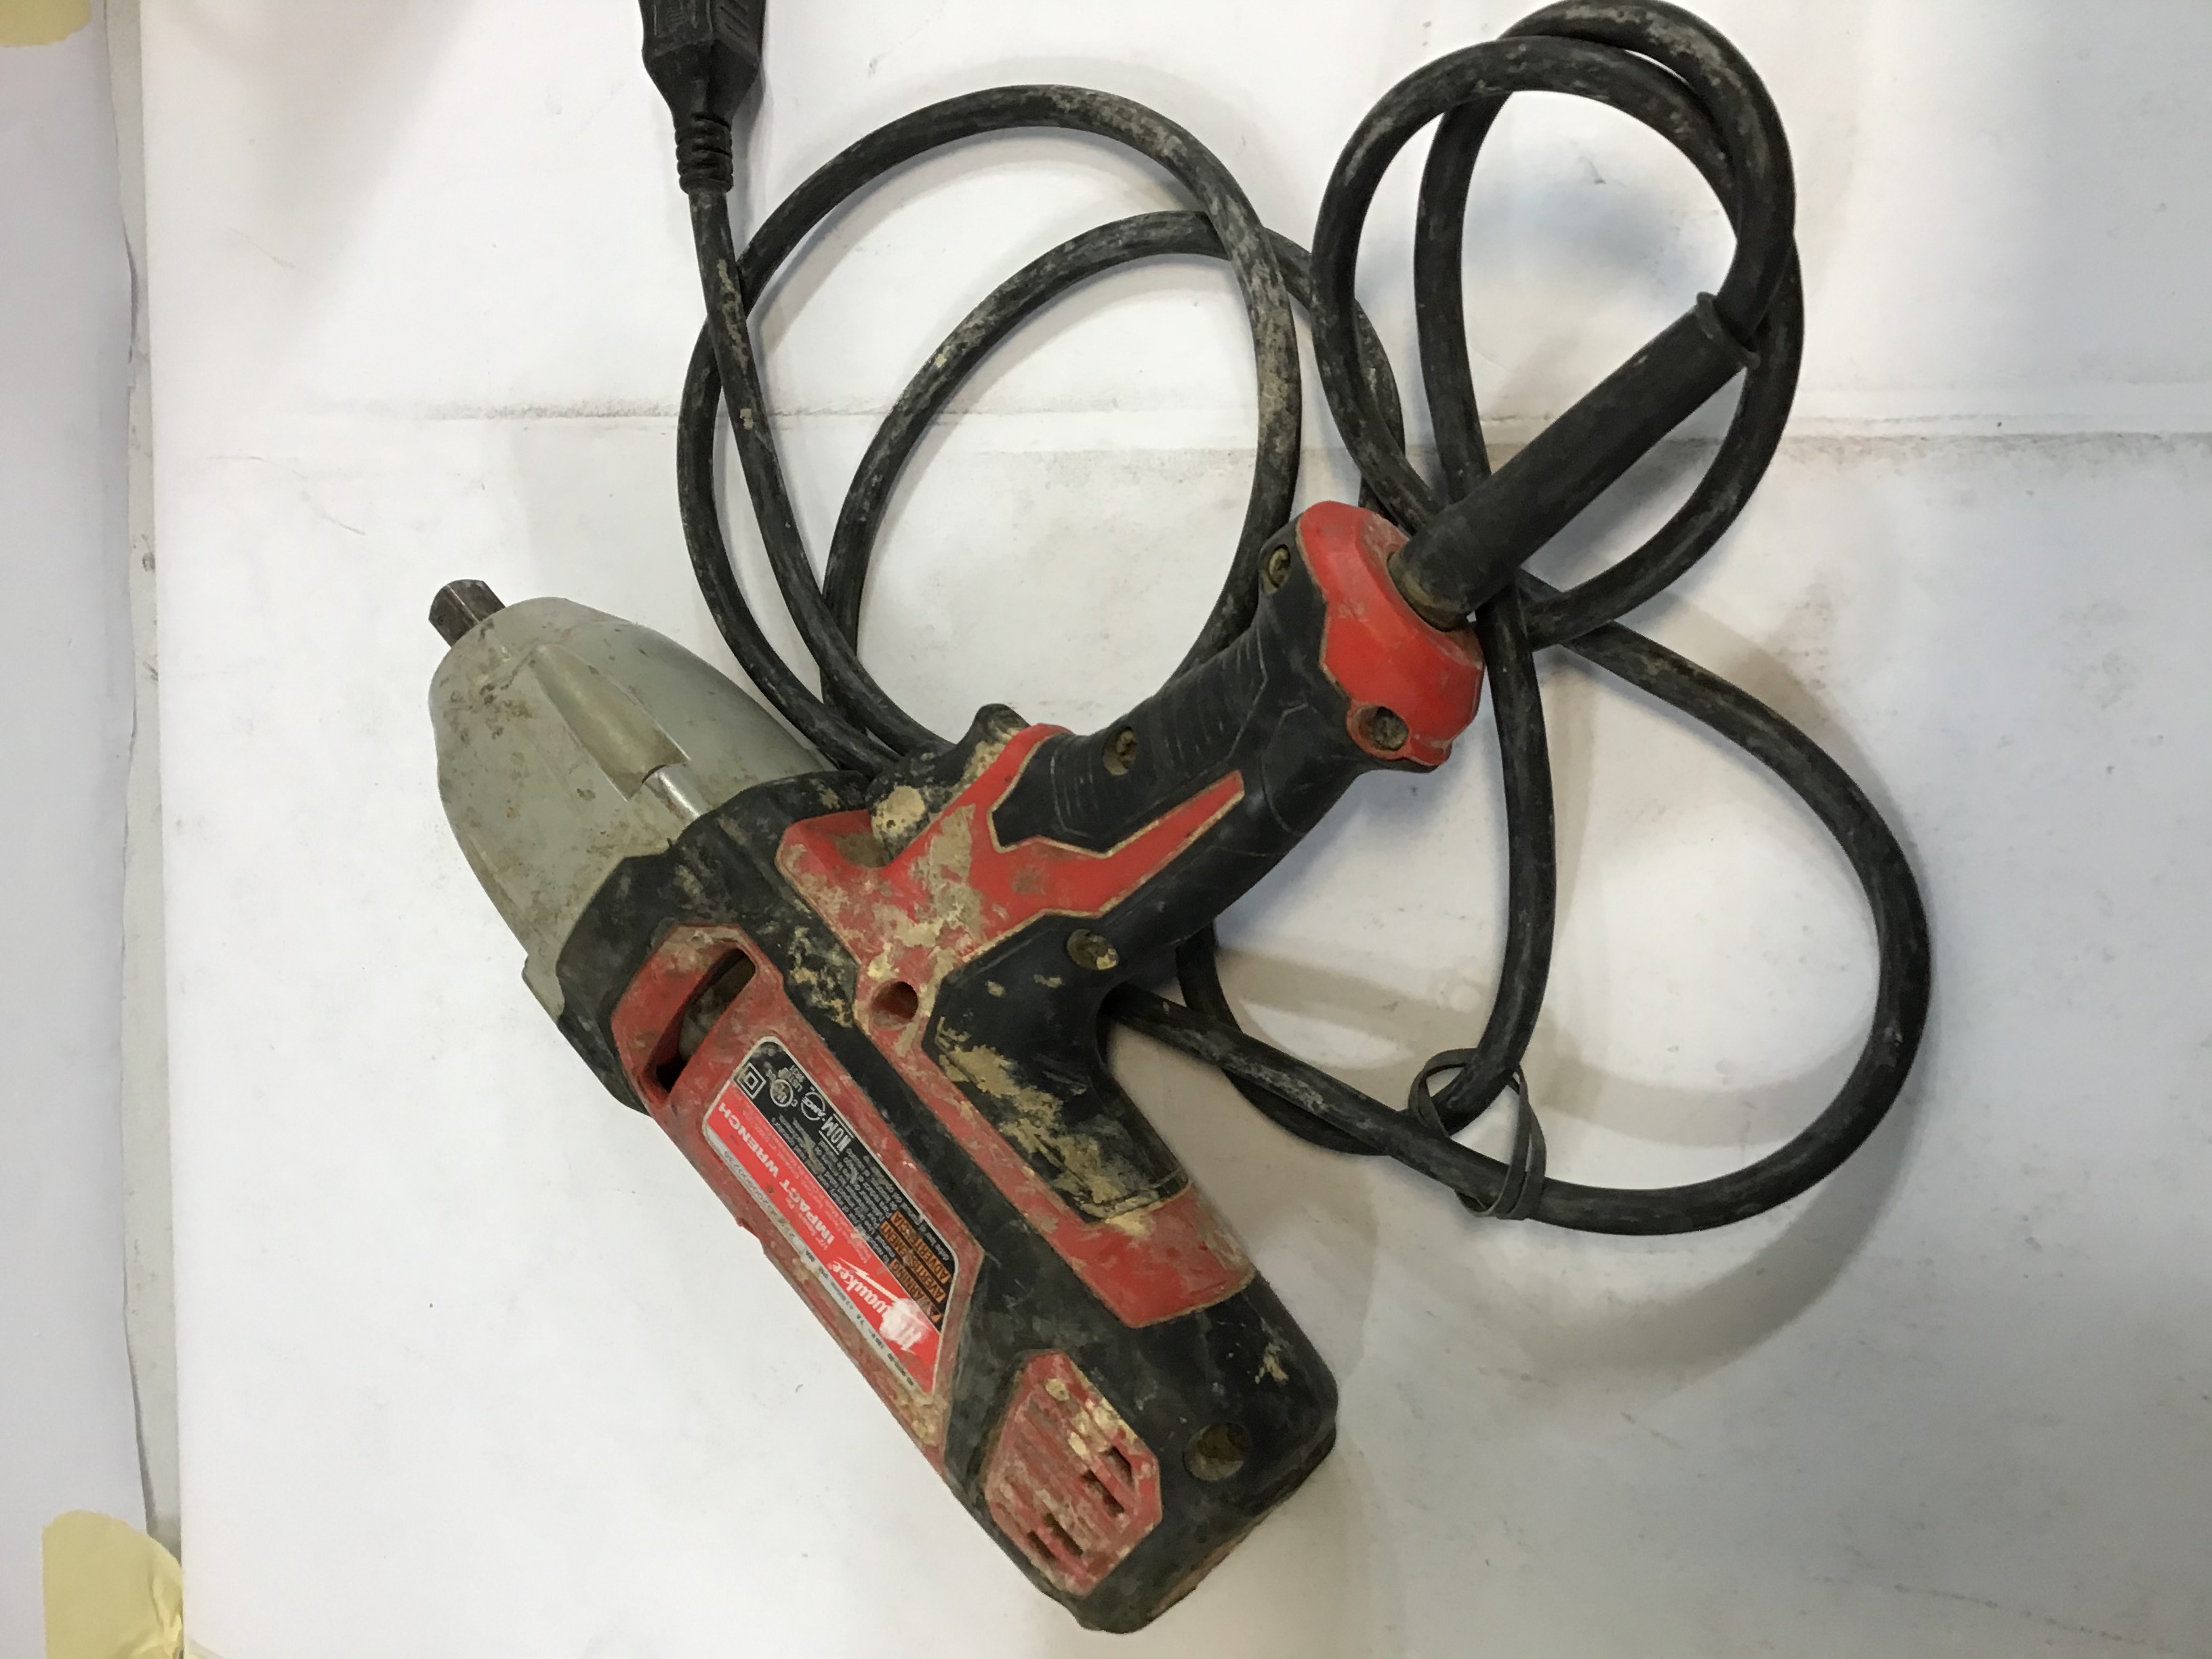 FOR PARTS NOT WORKING Milwaukee 907020 impact wrench(H) eBay